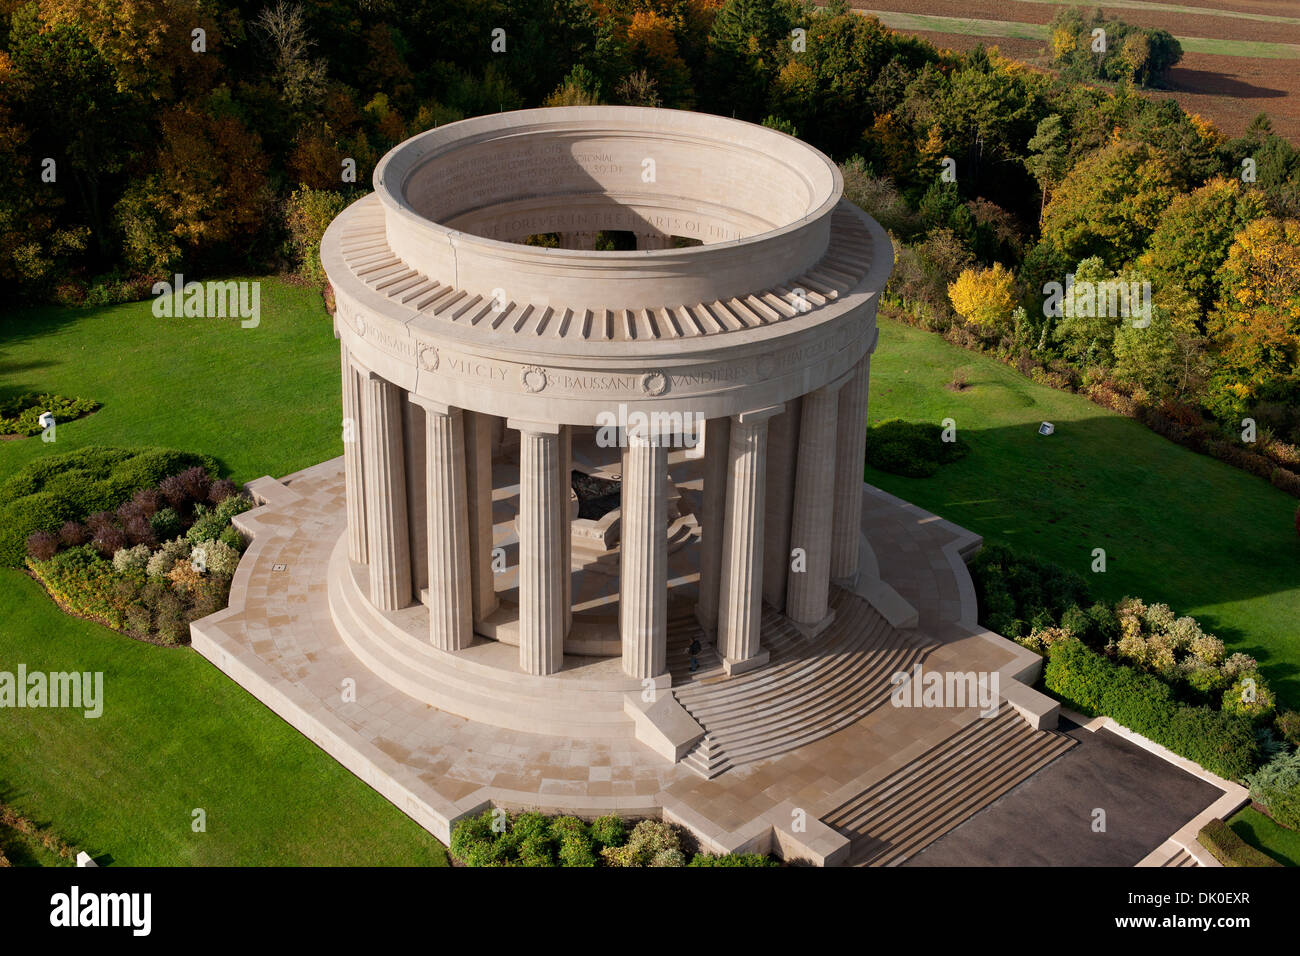 AERIAL VIEW. World War I memorial to fallen U.S. soldiers. Montsec American Monument, Montsec, Meuse, Lorraine, Grand Est, France. Stock Photo